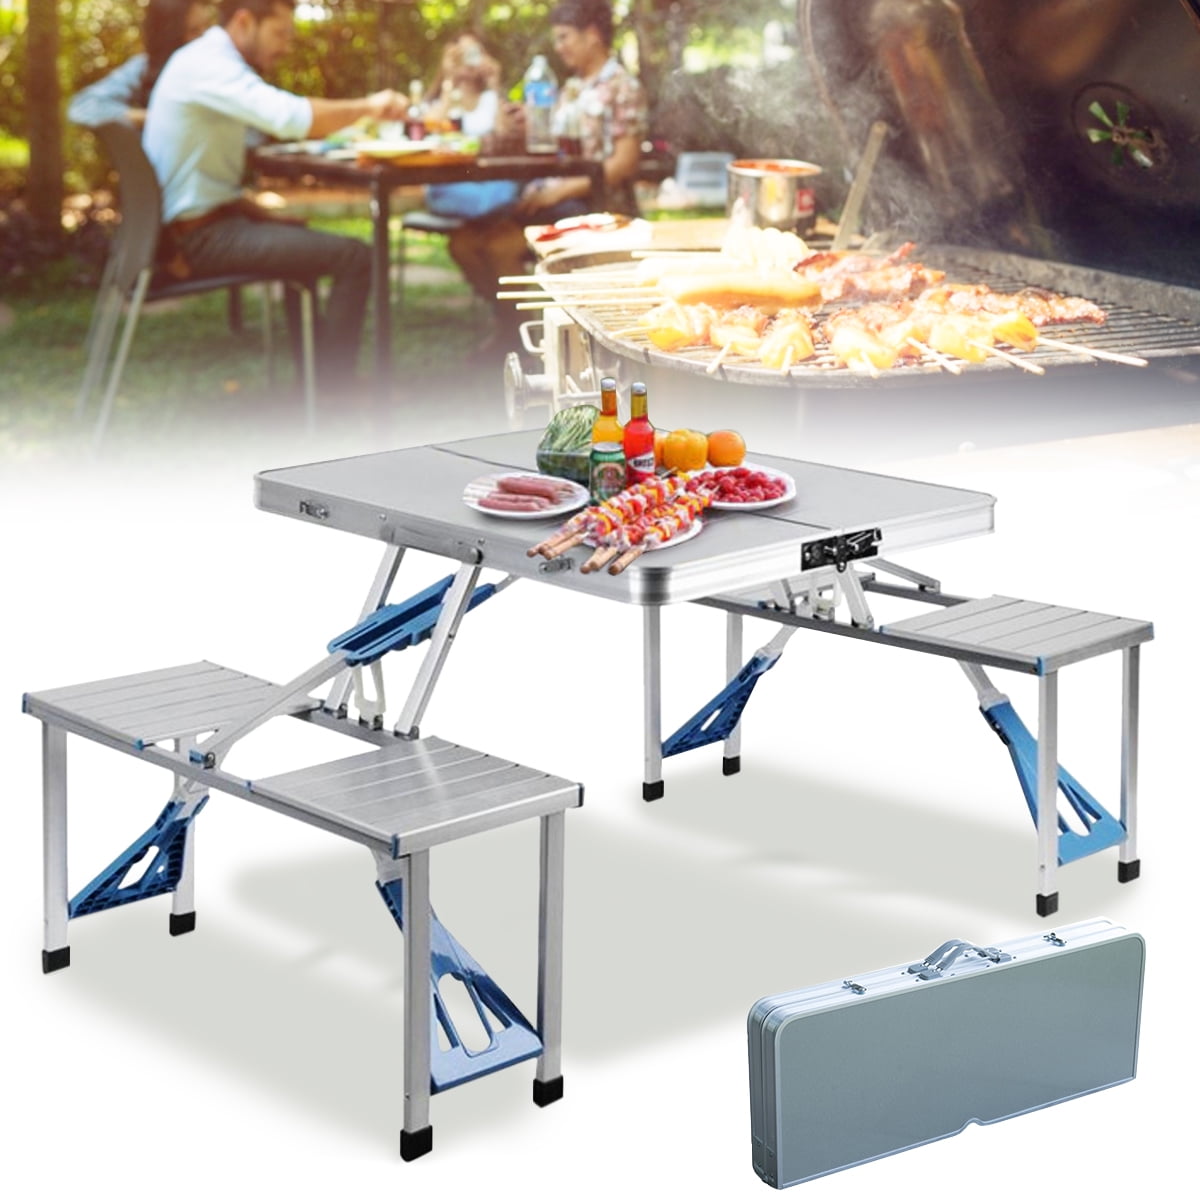 Details about   Folding Picnic Table and Chairs Set Aluminum Portable Camping Desk with 4 Seats 